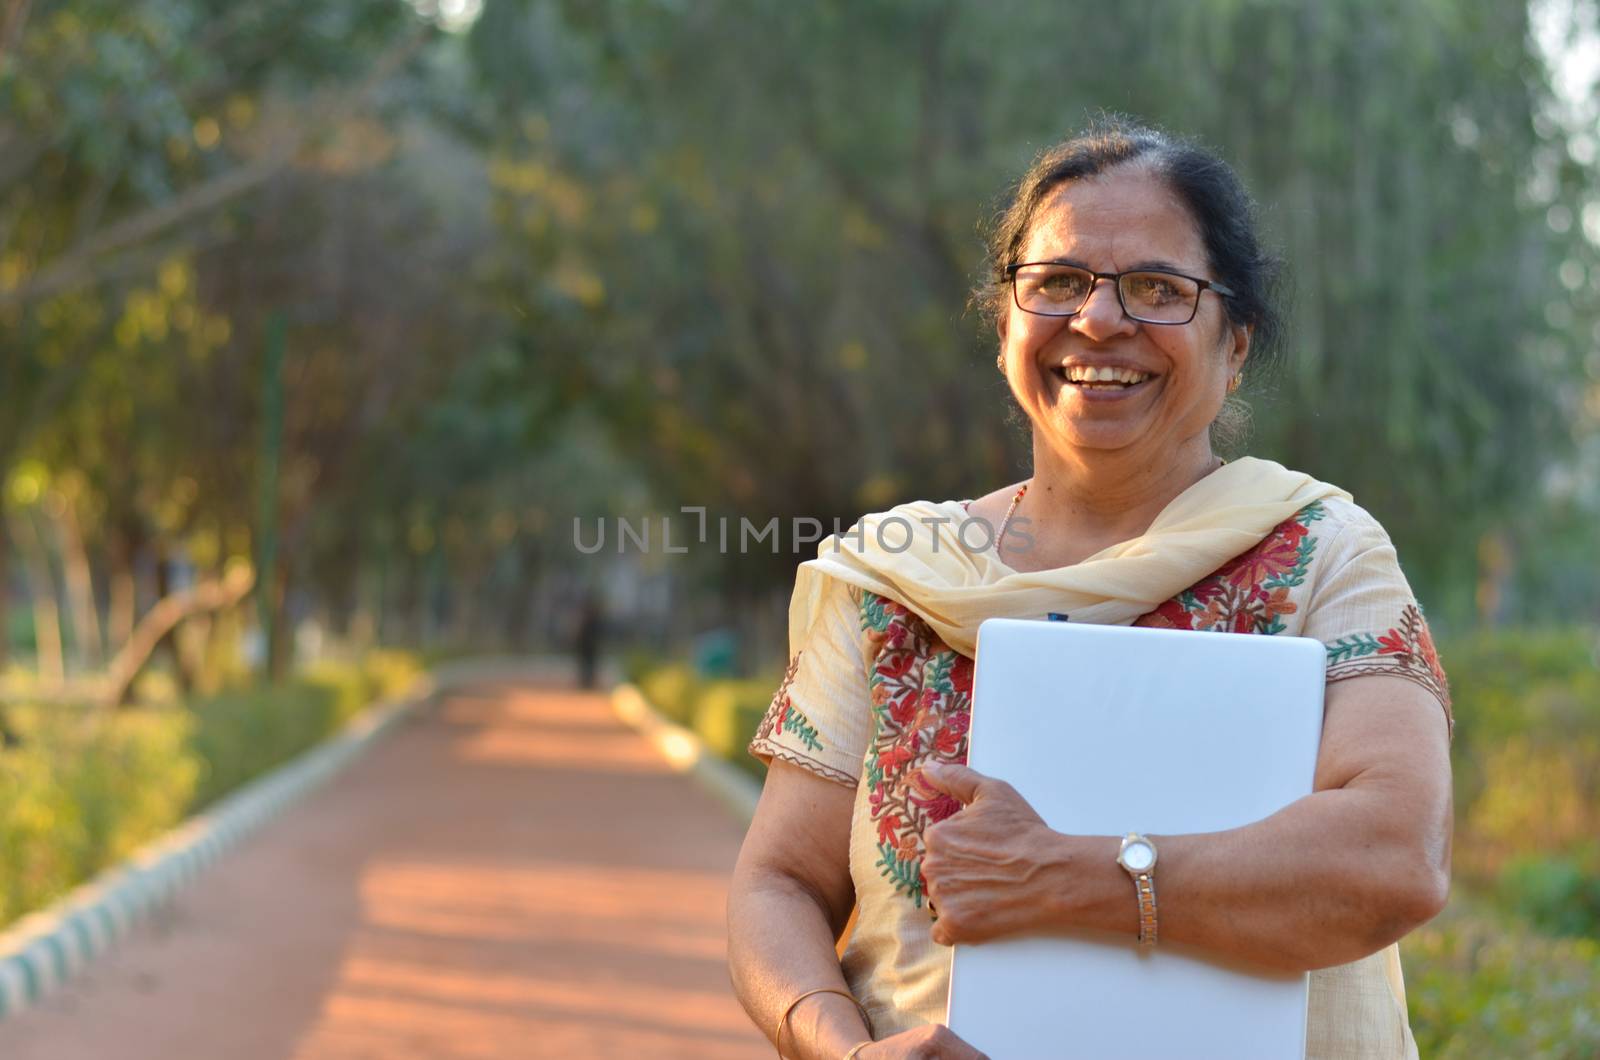 Portrait of a confident retired Senior Indian woman carrying a laptop in a park wearing off white salwar kamiz. Concept - Digital literacy in India for senior citizens